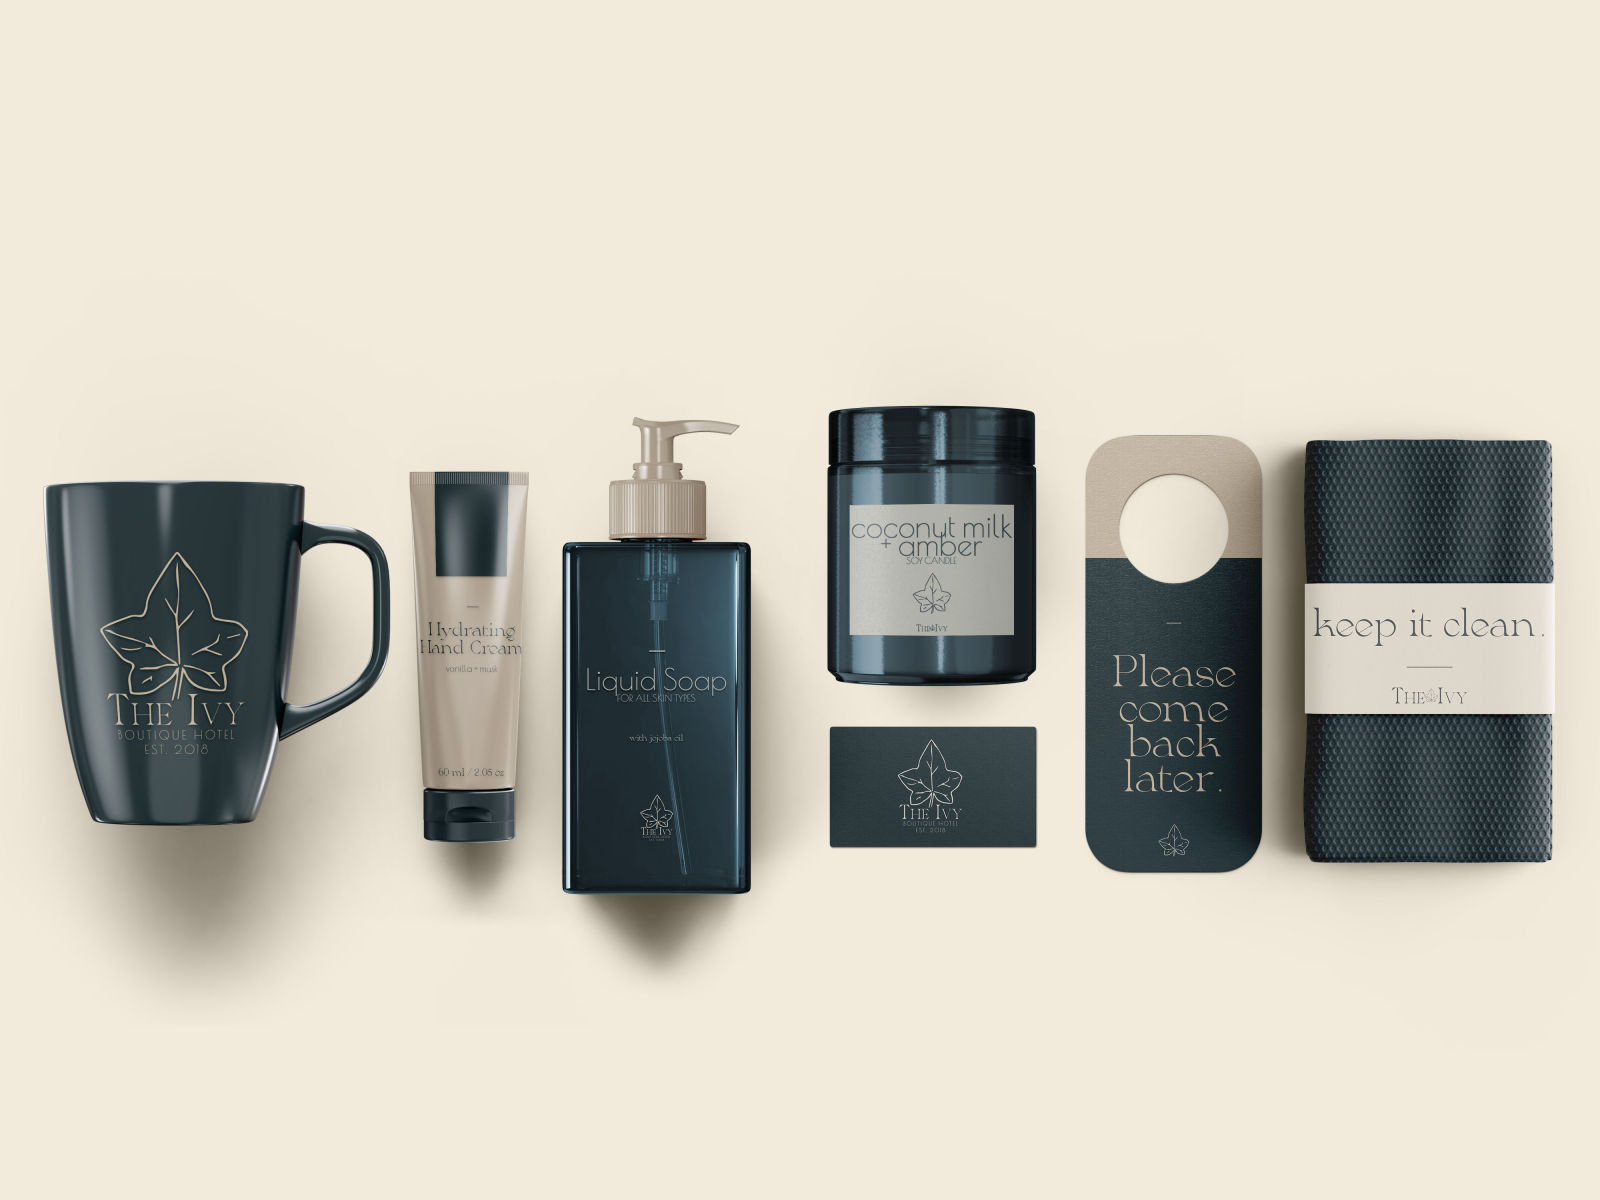 The Ivy Hotel - Amenities by Hallie Driscoll on Dribbble